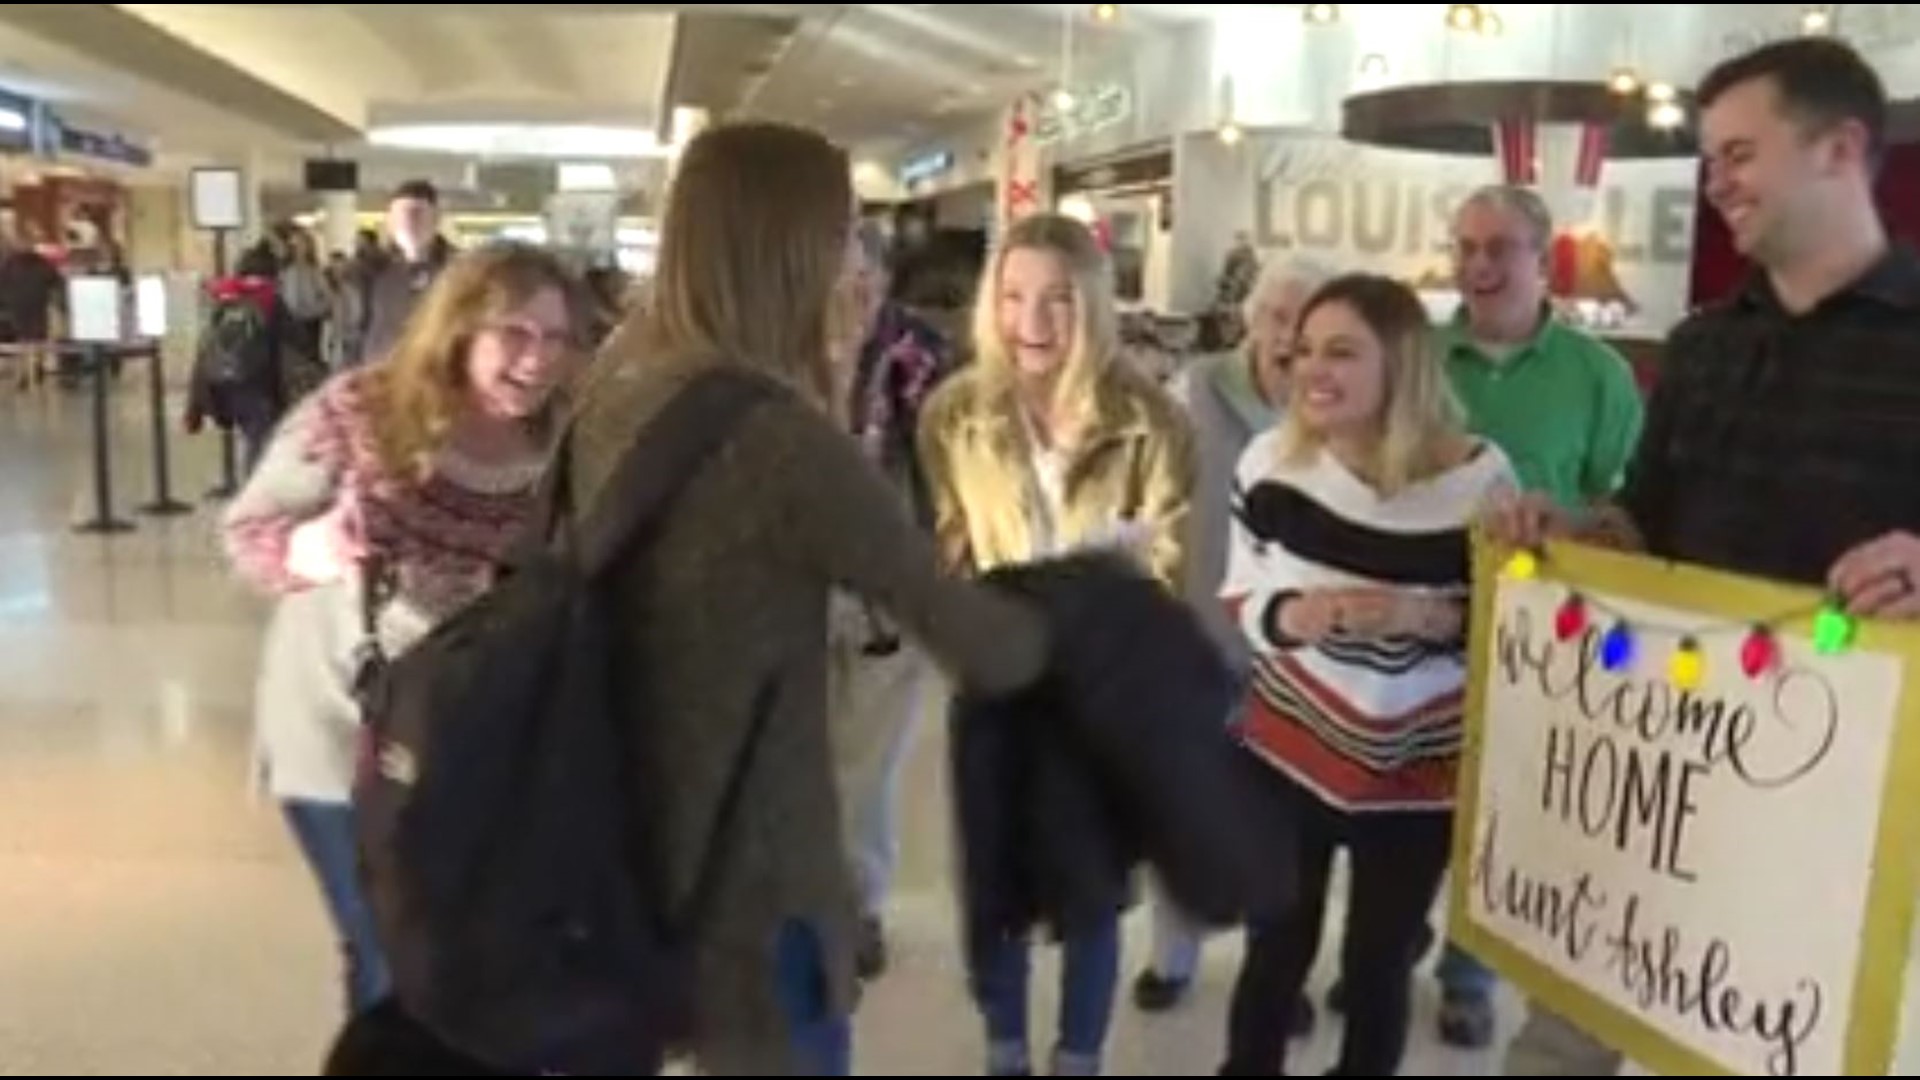 A woman returning home for the holidays was surprised at the airport with news that shes going to be an aunt.